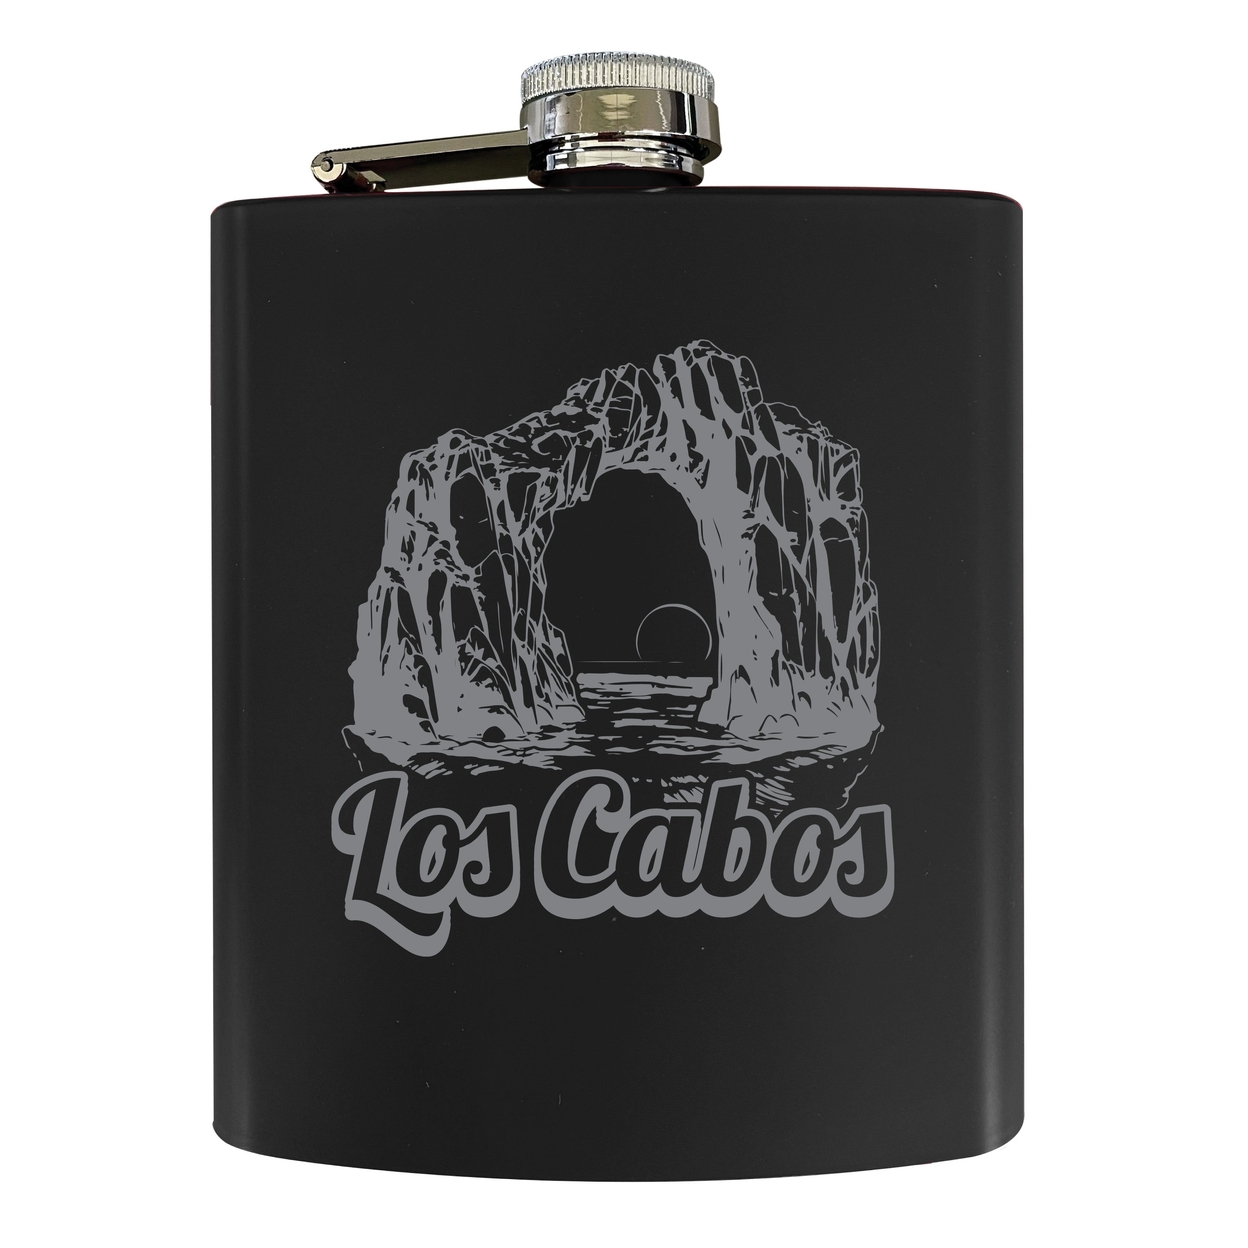 Los Cabos Mexico Souvenir 7 Oz Engraved Steel Flask Matte Finish - Red,,2-Pack